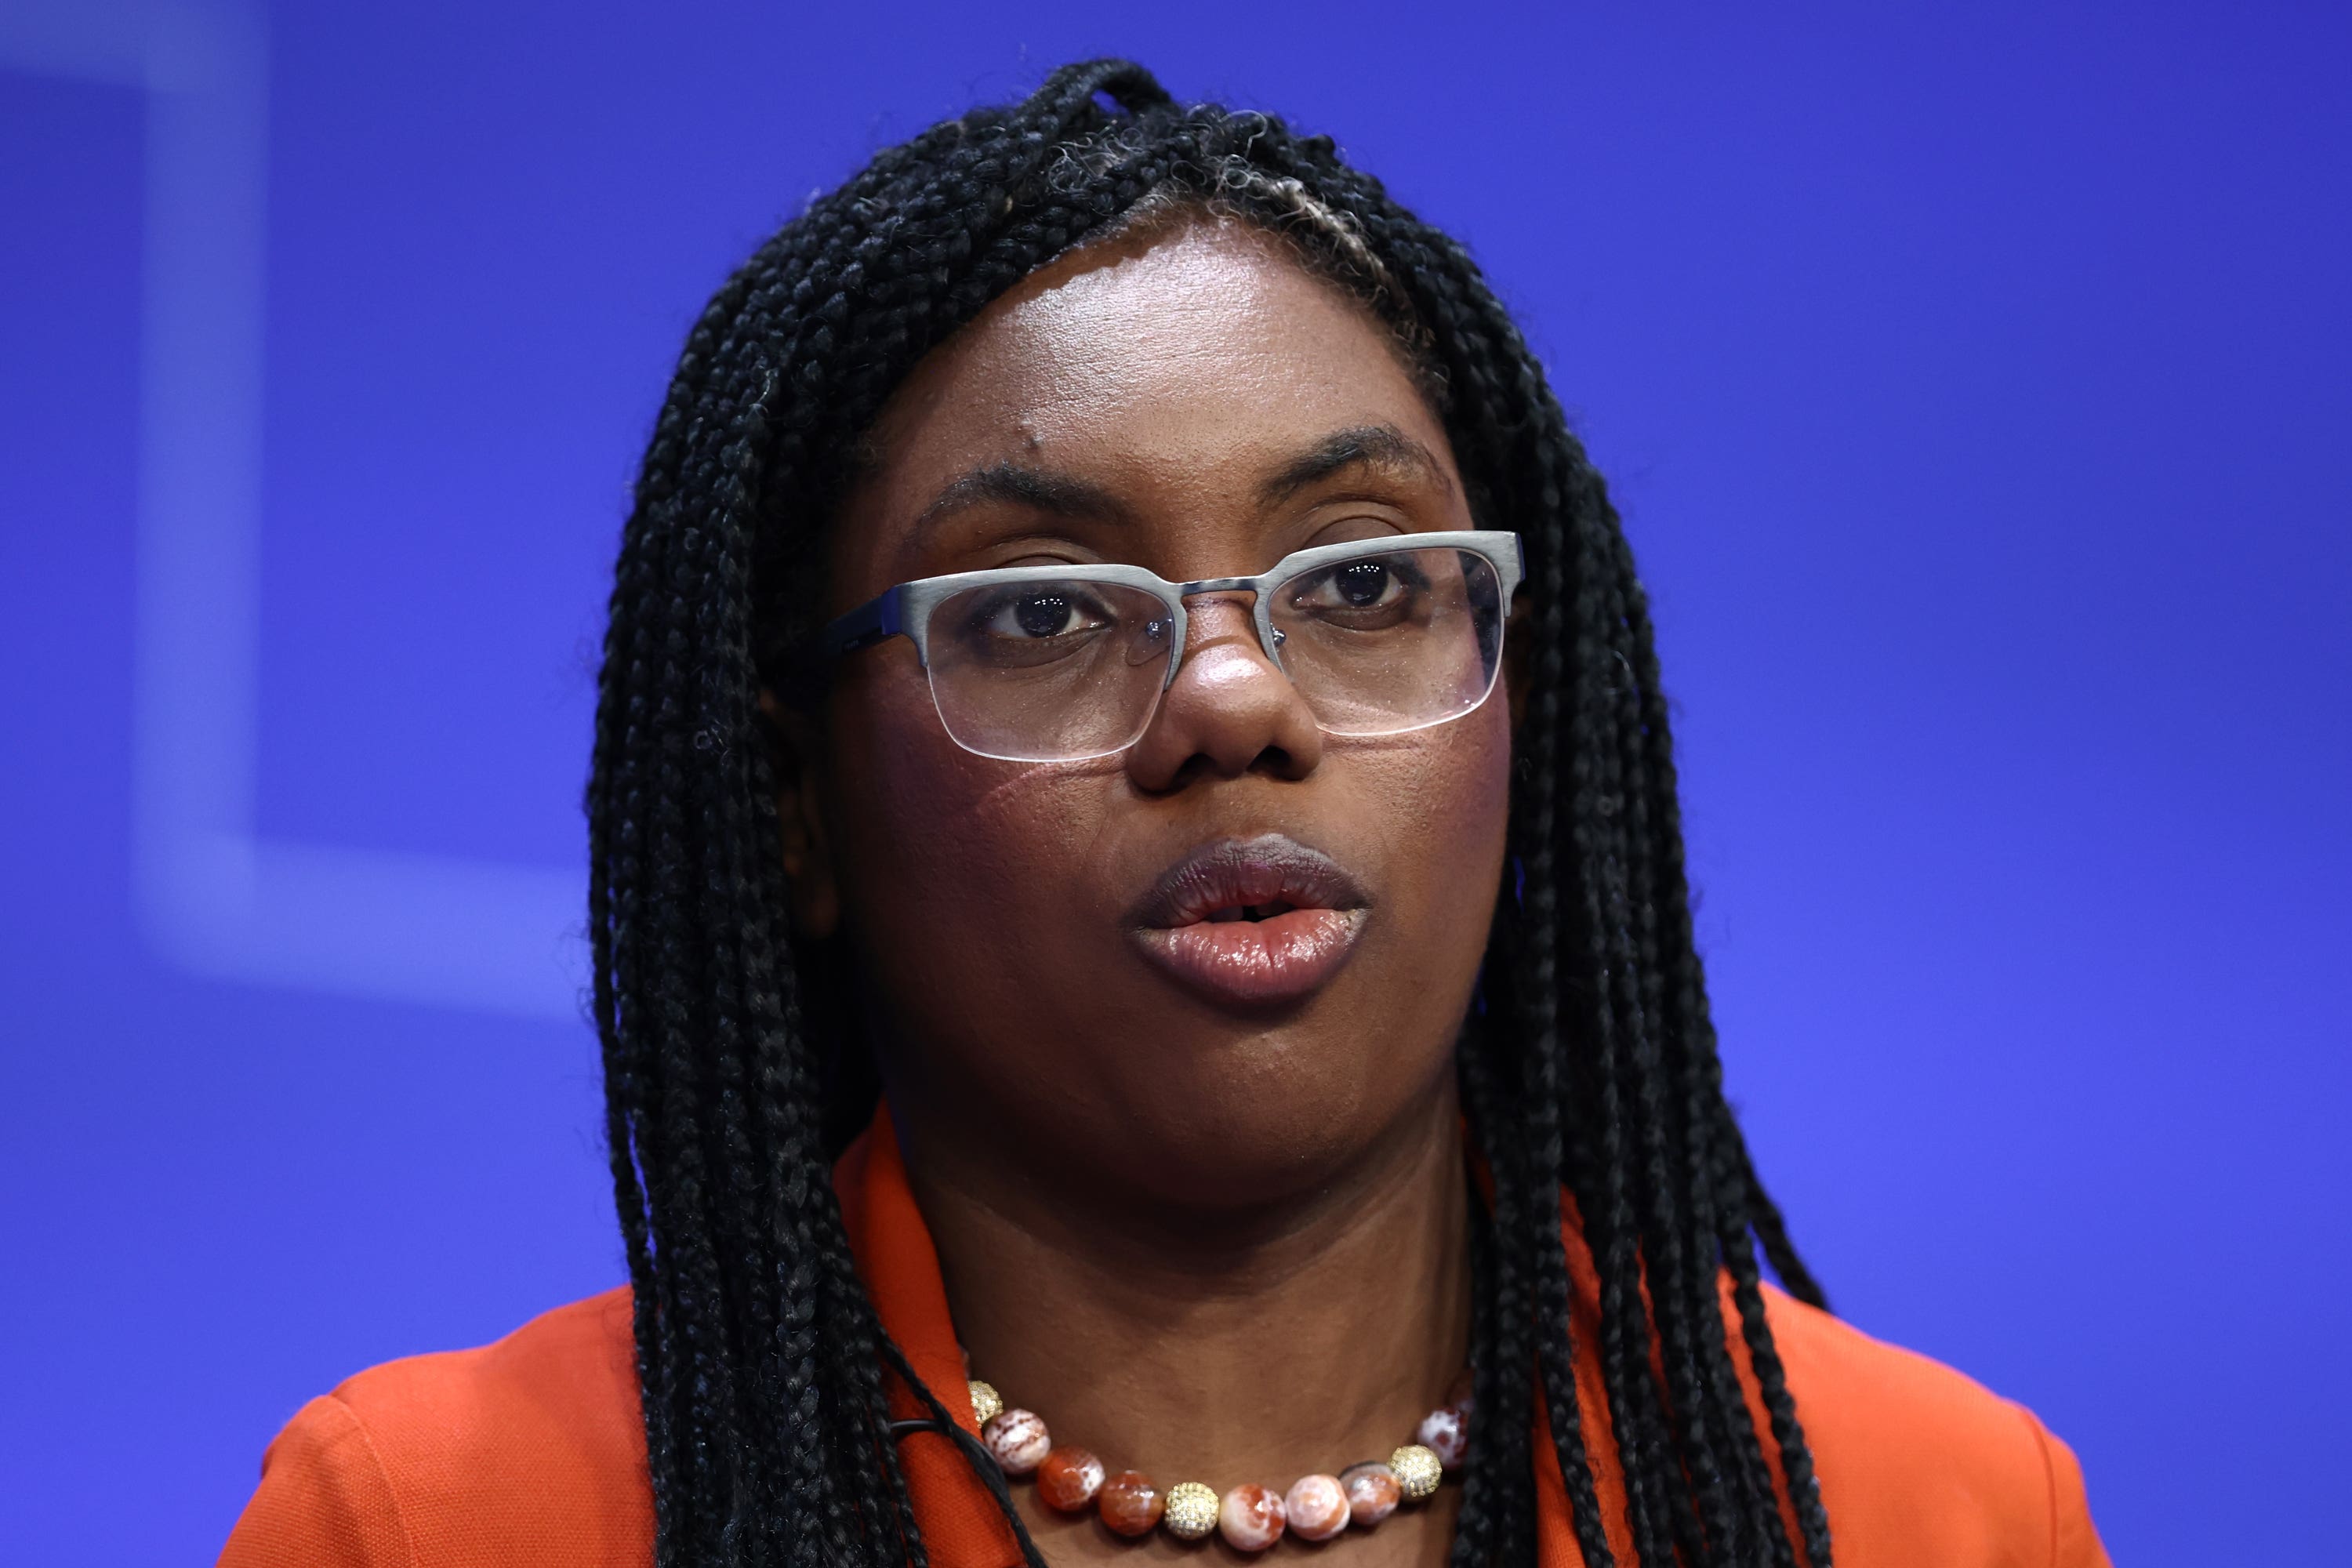 Equalities minister Kemi Badenoch is top of the pops in the Tory league table